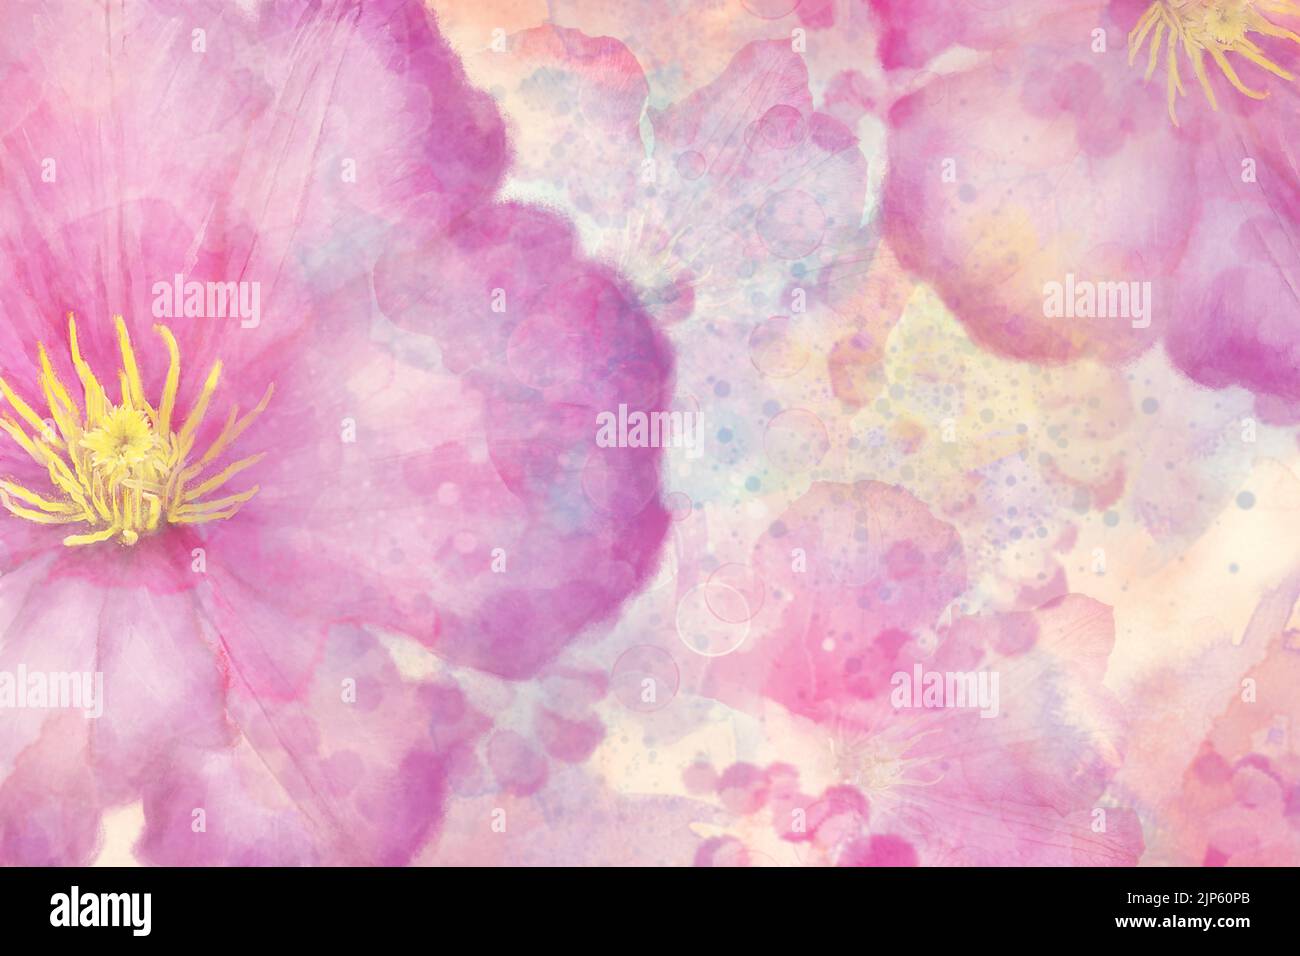 Abstract Flower Background Watercolor.Digital Illustration. Stock Photo